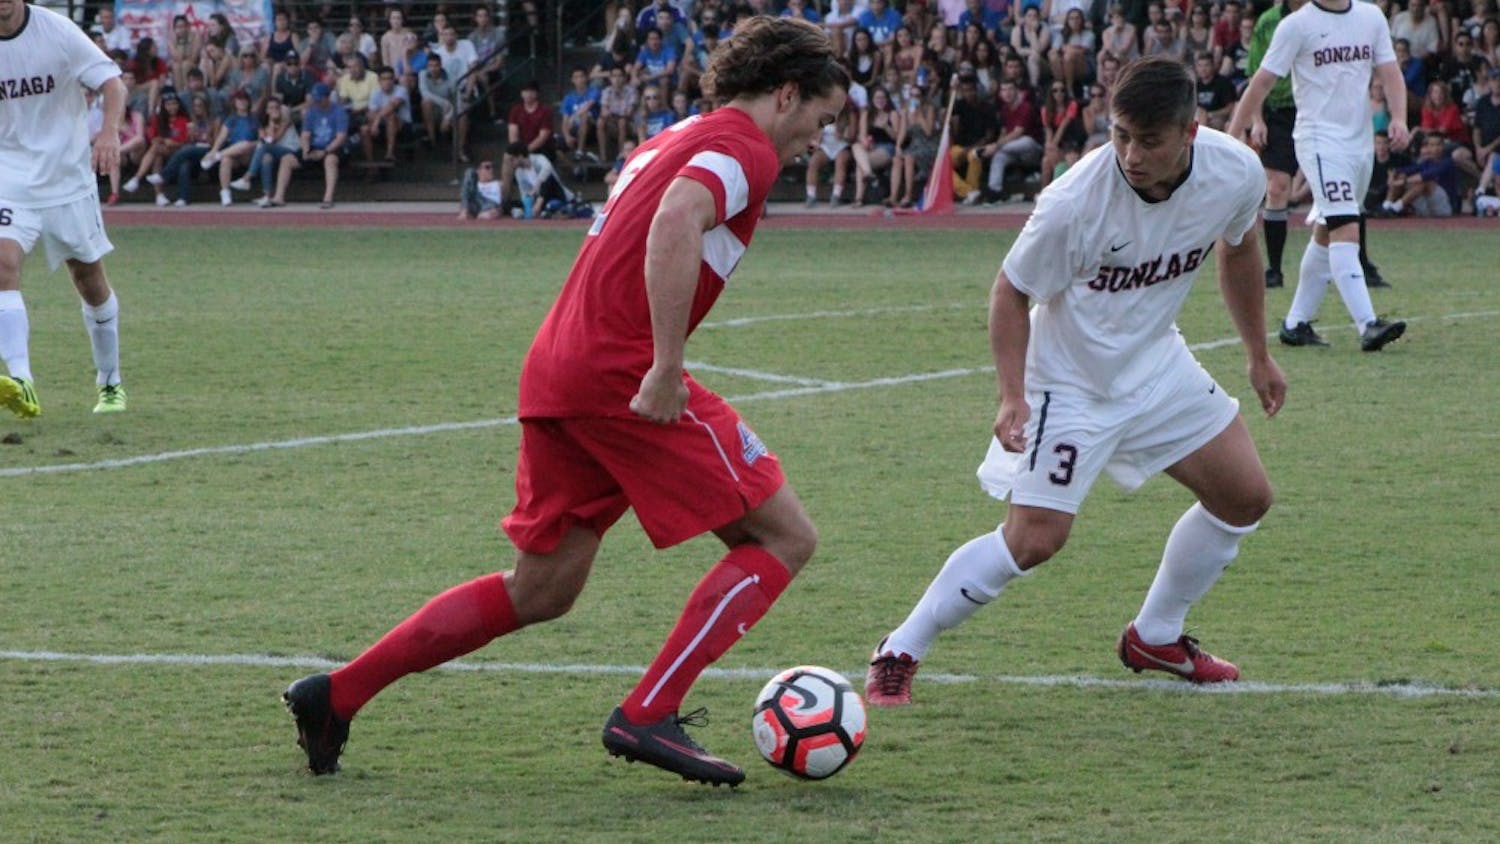 Senior defender Chris Fanet, pictured Sept. 9 against Gonzaga, scored the AU's lone goal in the team's loss in the Patriot League Championship to Colgate.